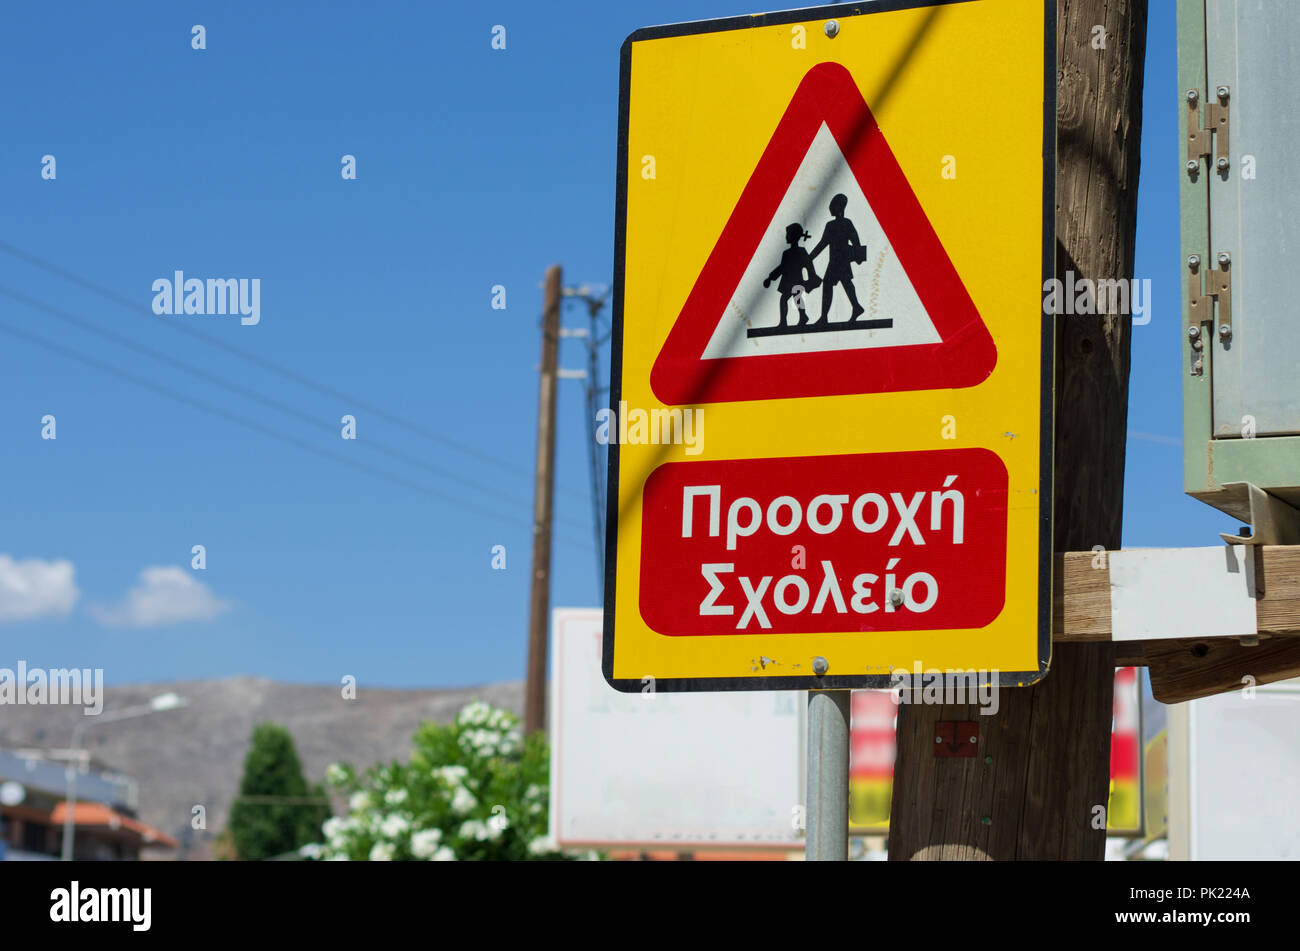 Triangle road sign 'Caution children' sunlit and greek inscription (no trade mark)  in Greece Stock Photo